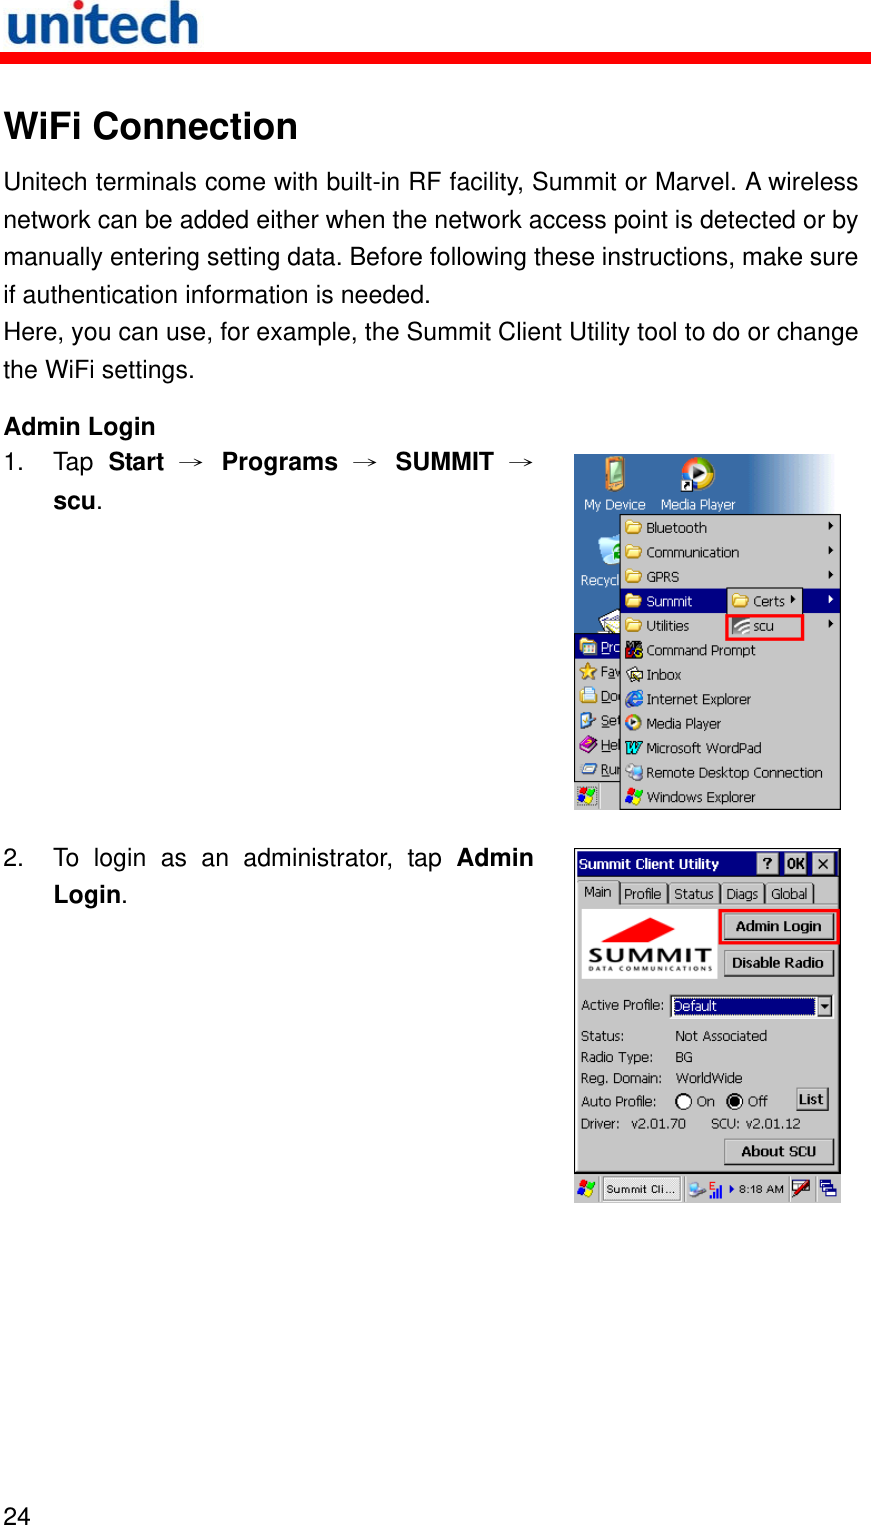   24  WiFi Connection Unitech terminals come with built-in RF facility, Summit or Marvel. A wireless network can be added either when the network access point is detected or by manually entering setting data. Before following these instructions, make sure if authentication information is needed. Here, you can use, for example, the Summit Client Utility tool to do or change the WiFi settings. Admin Login 1. Tap Start → Programs → SUMMIT →scu.  2.  To login as an administrator, tap Admin Login.  